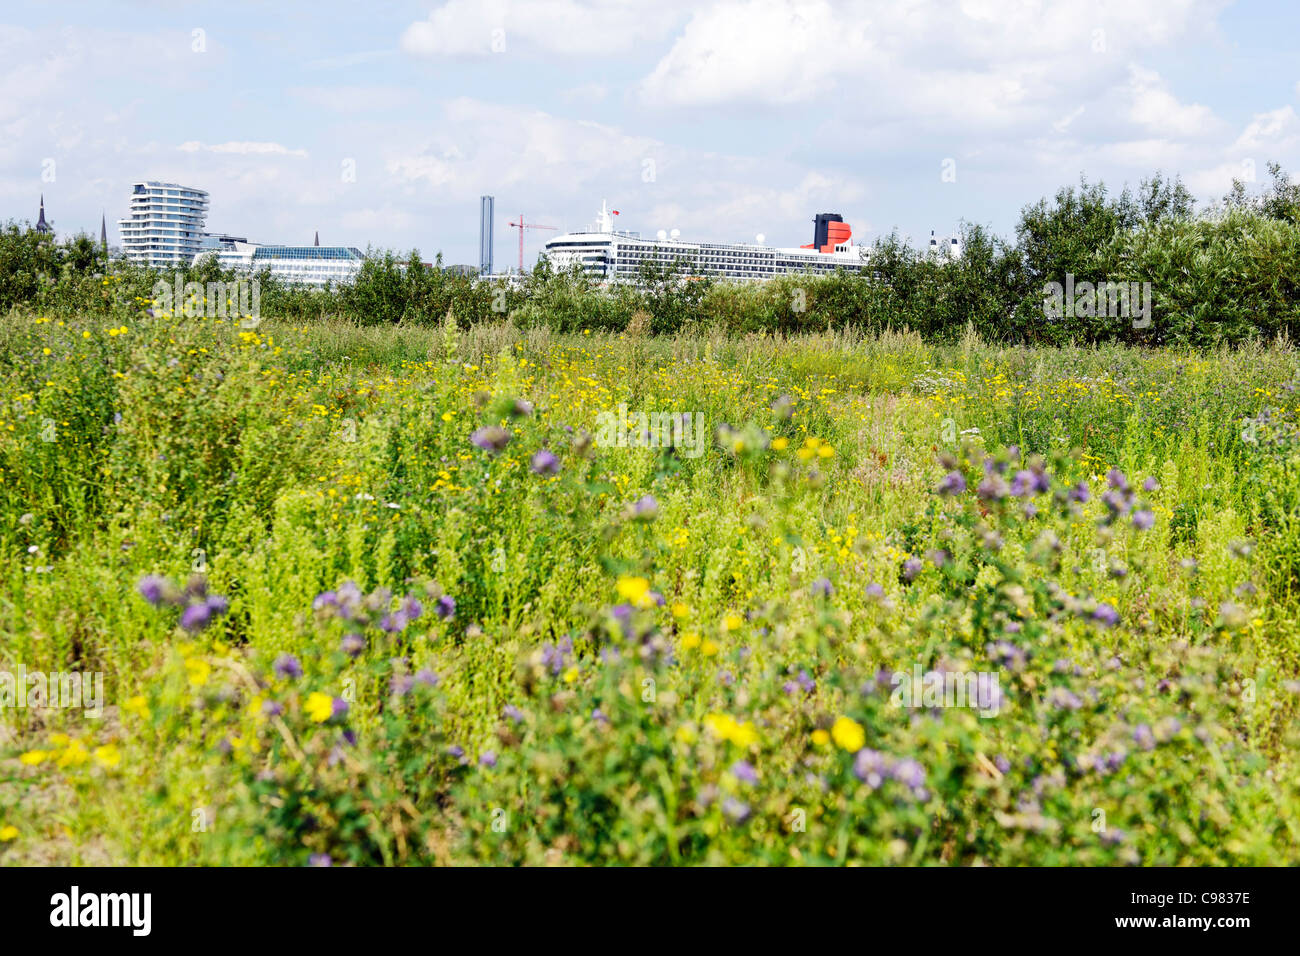 Passenger ship Queen Mary 2 behind a meadow at port of Hamburg, Hanseatic city of Hamburg, Germany, Europe Stock Photo